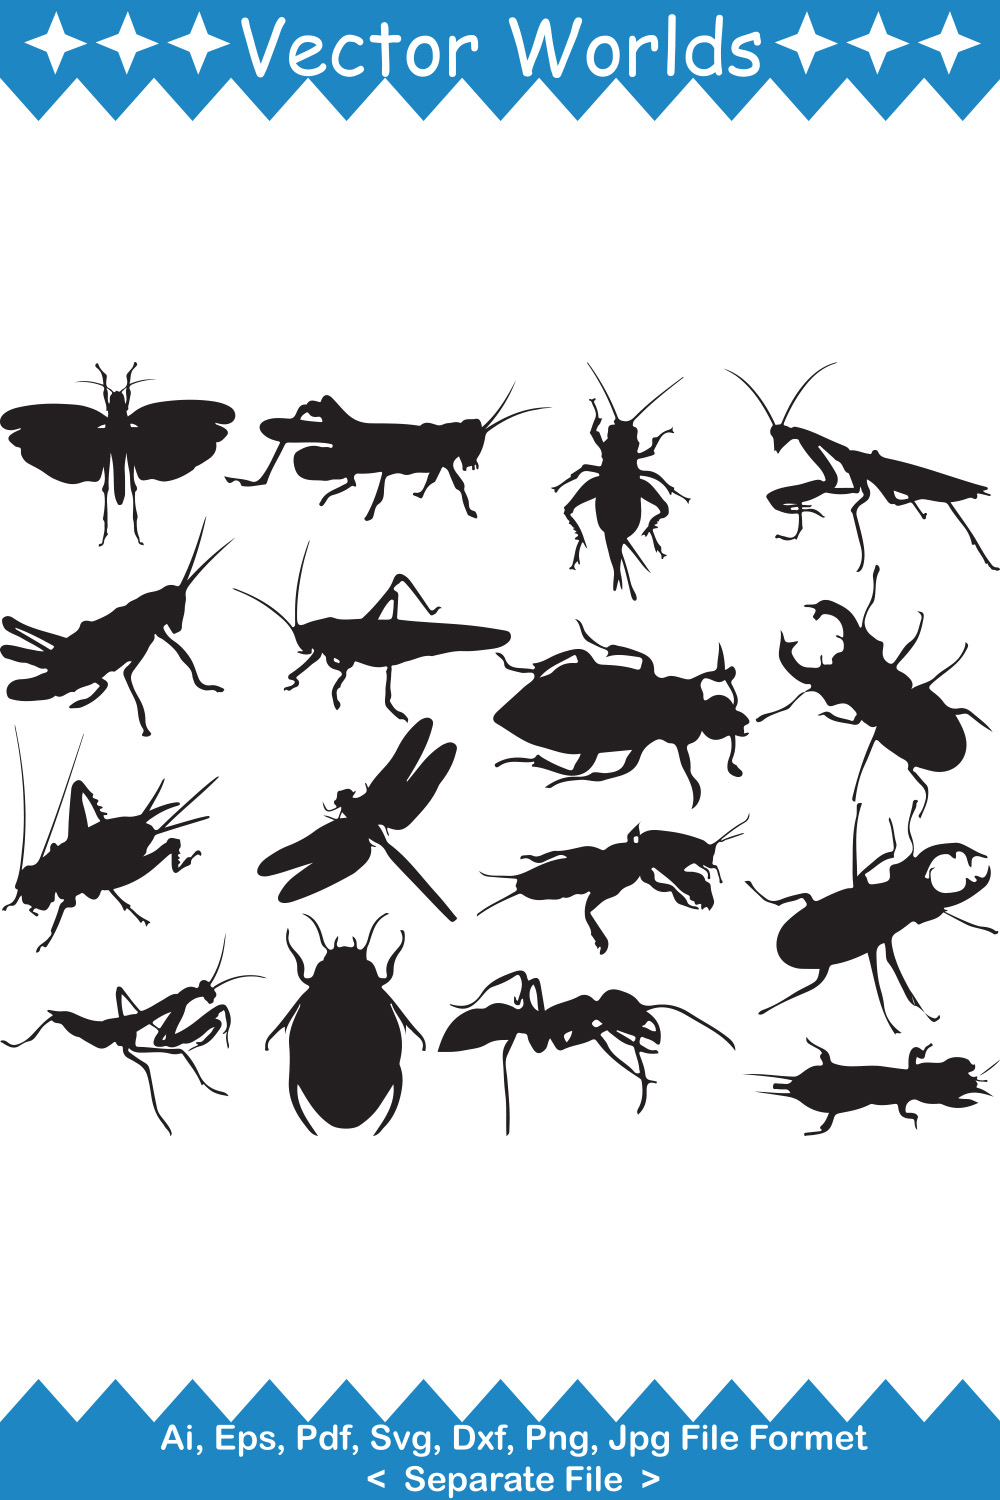 Collection of insect silhouettes on a white background.